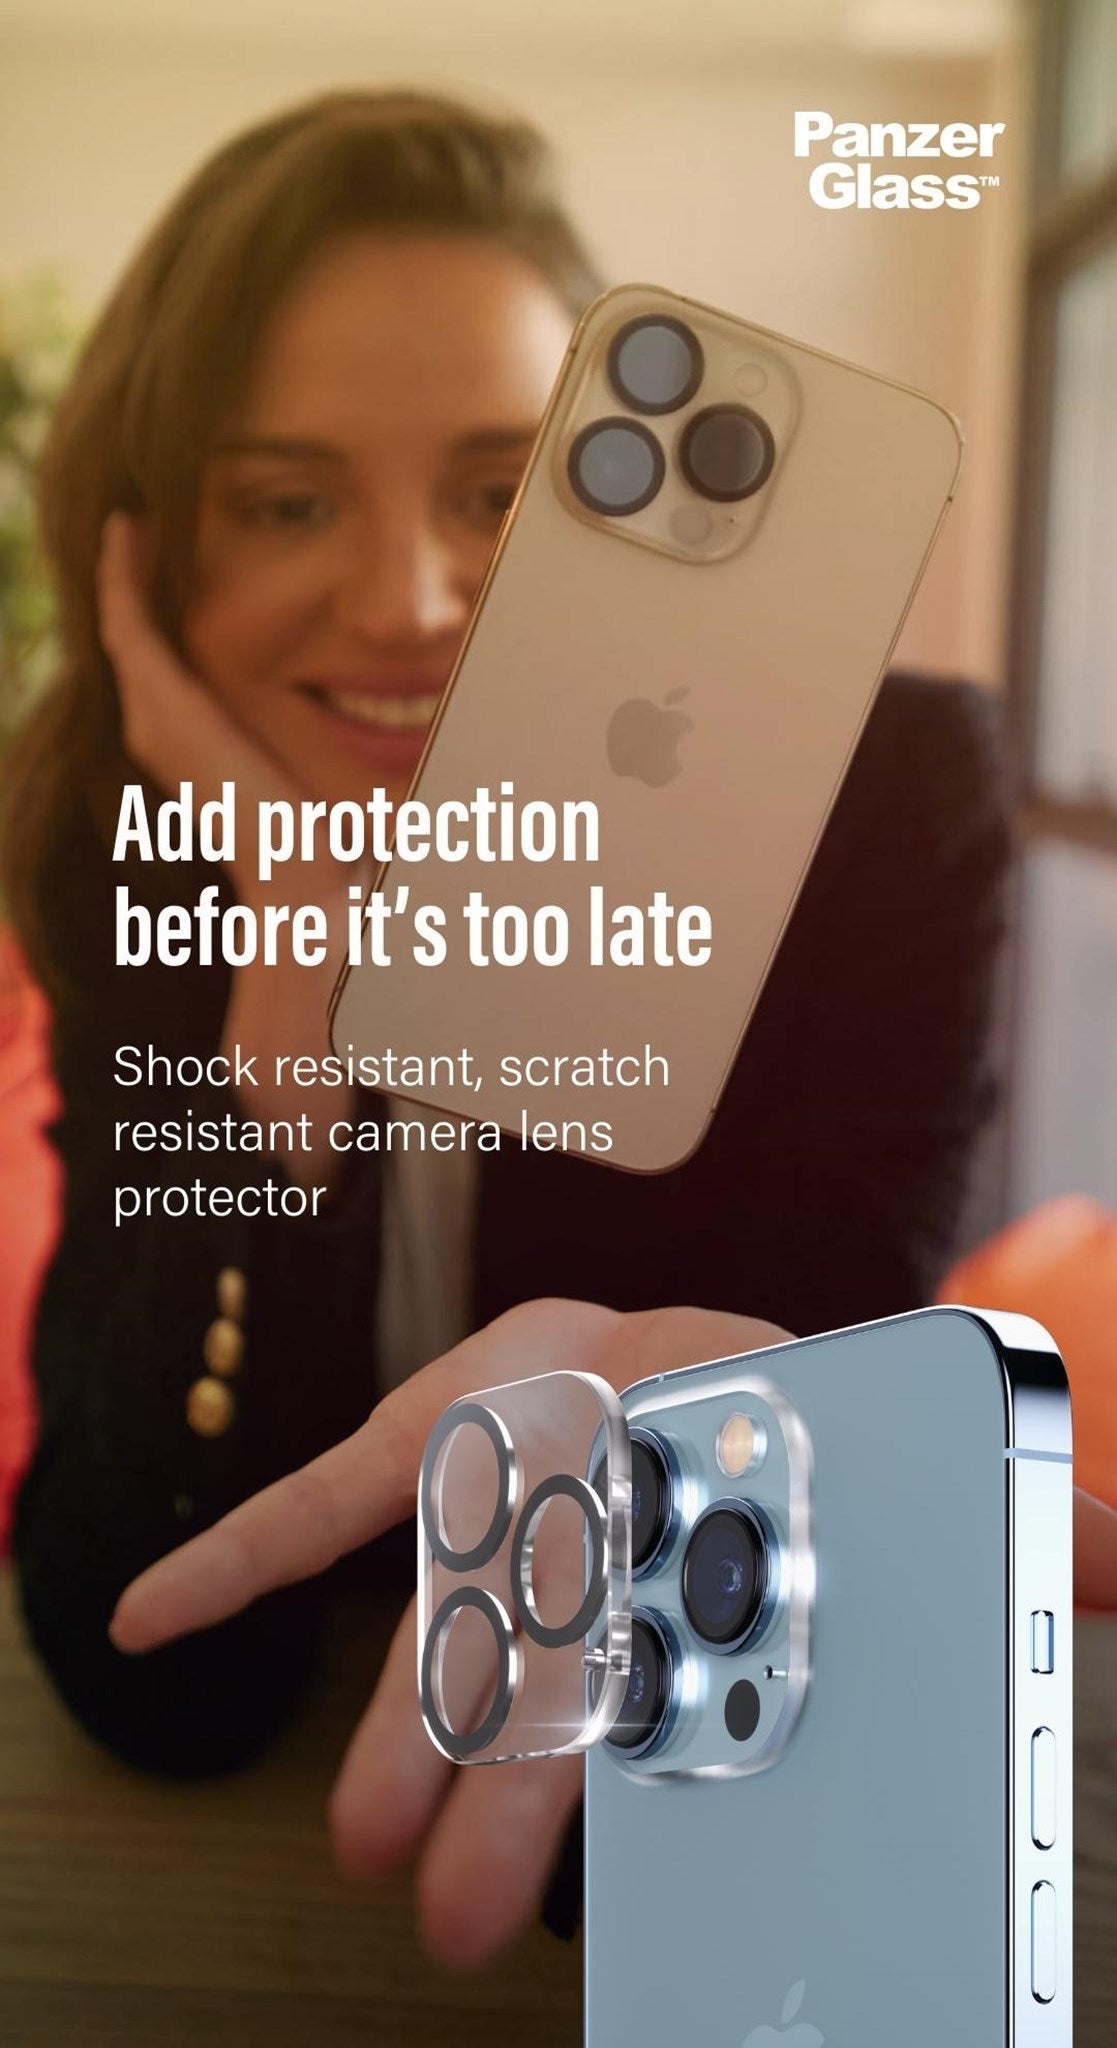 PanzerGlass® PicturePerfect Camera Lens Protector Apple iPhone 14 Pro